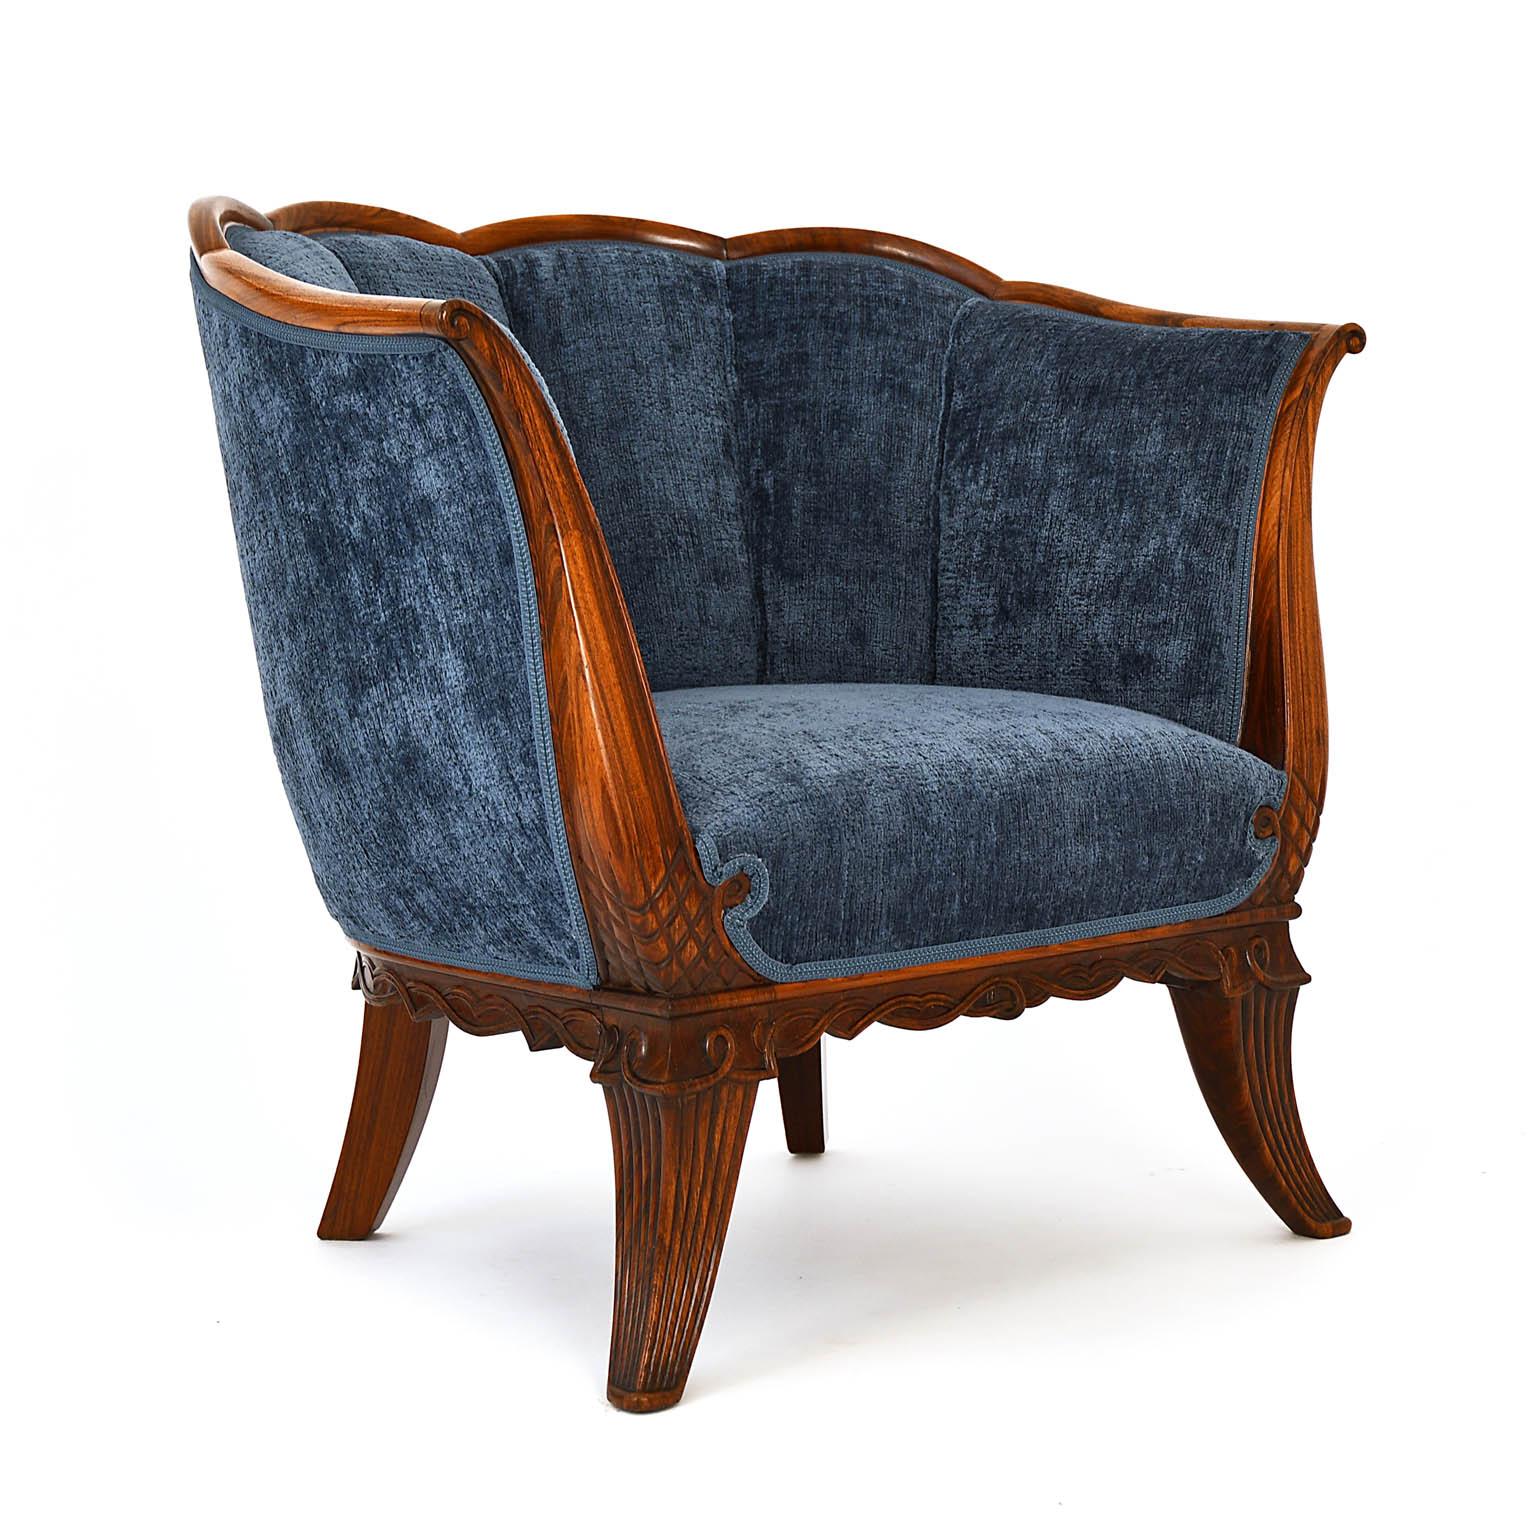 Armchair, Dagobert Peche style, from the Art Deco period with a lavishly carved frame in rosewood. The shell shape so clearly reflects the form of the time. The piece was found in Vienna and comes from one of the excellent workshops around the